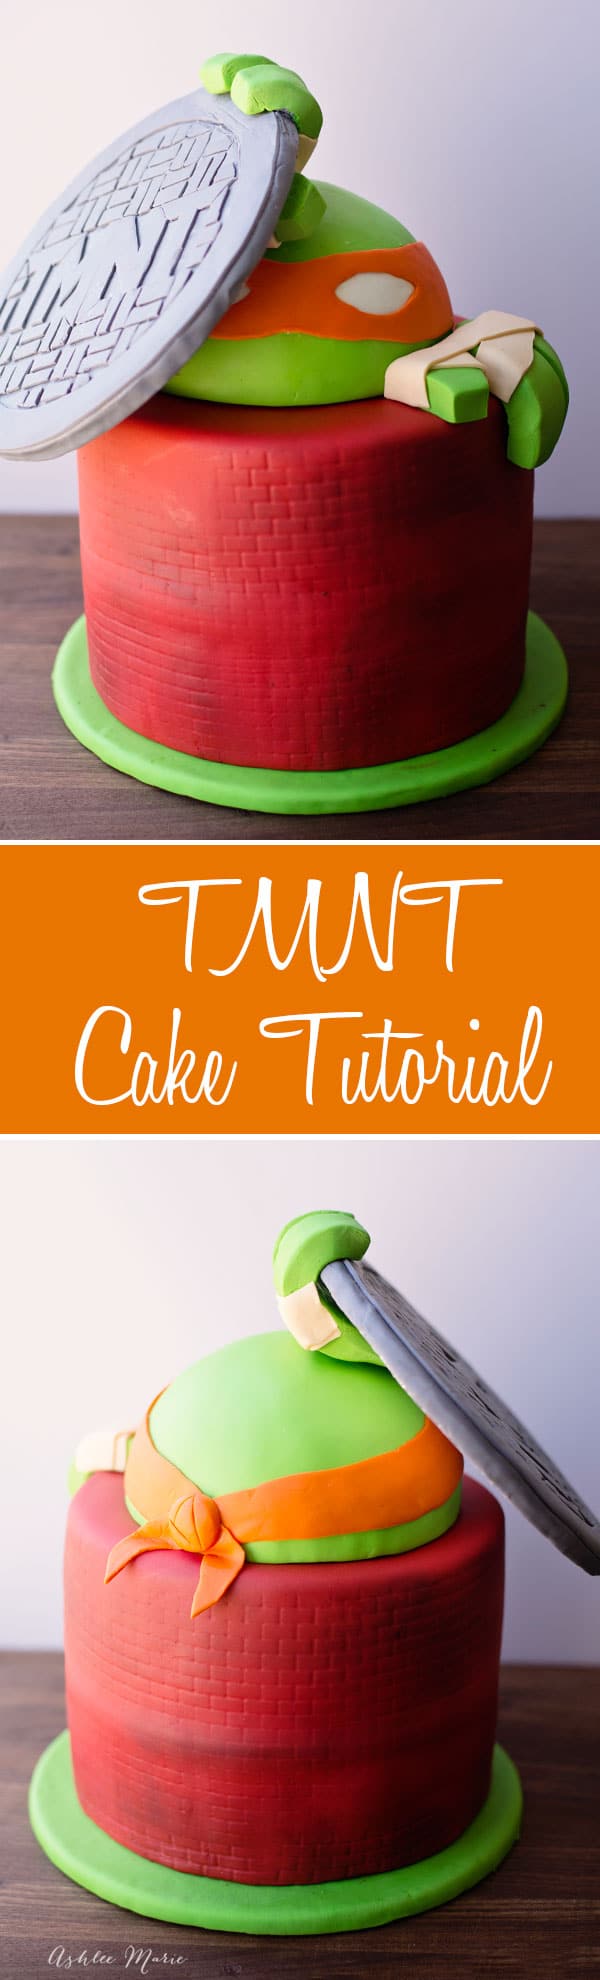 A full video tutorial for this Teenage Mutant Ninja Turtle Cake including the fondant manhole cover